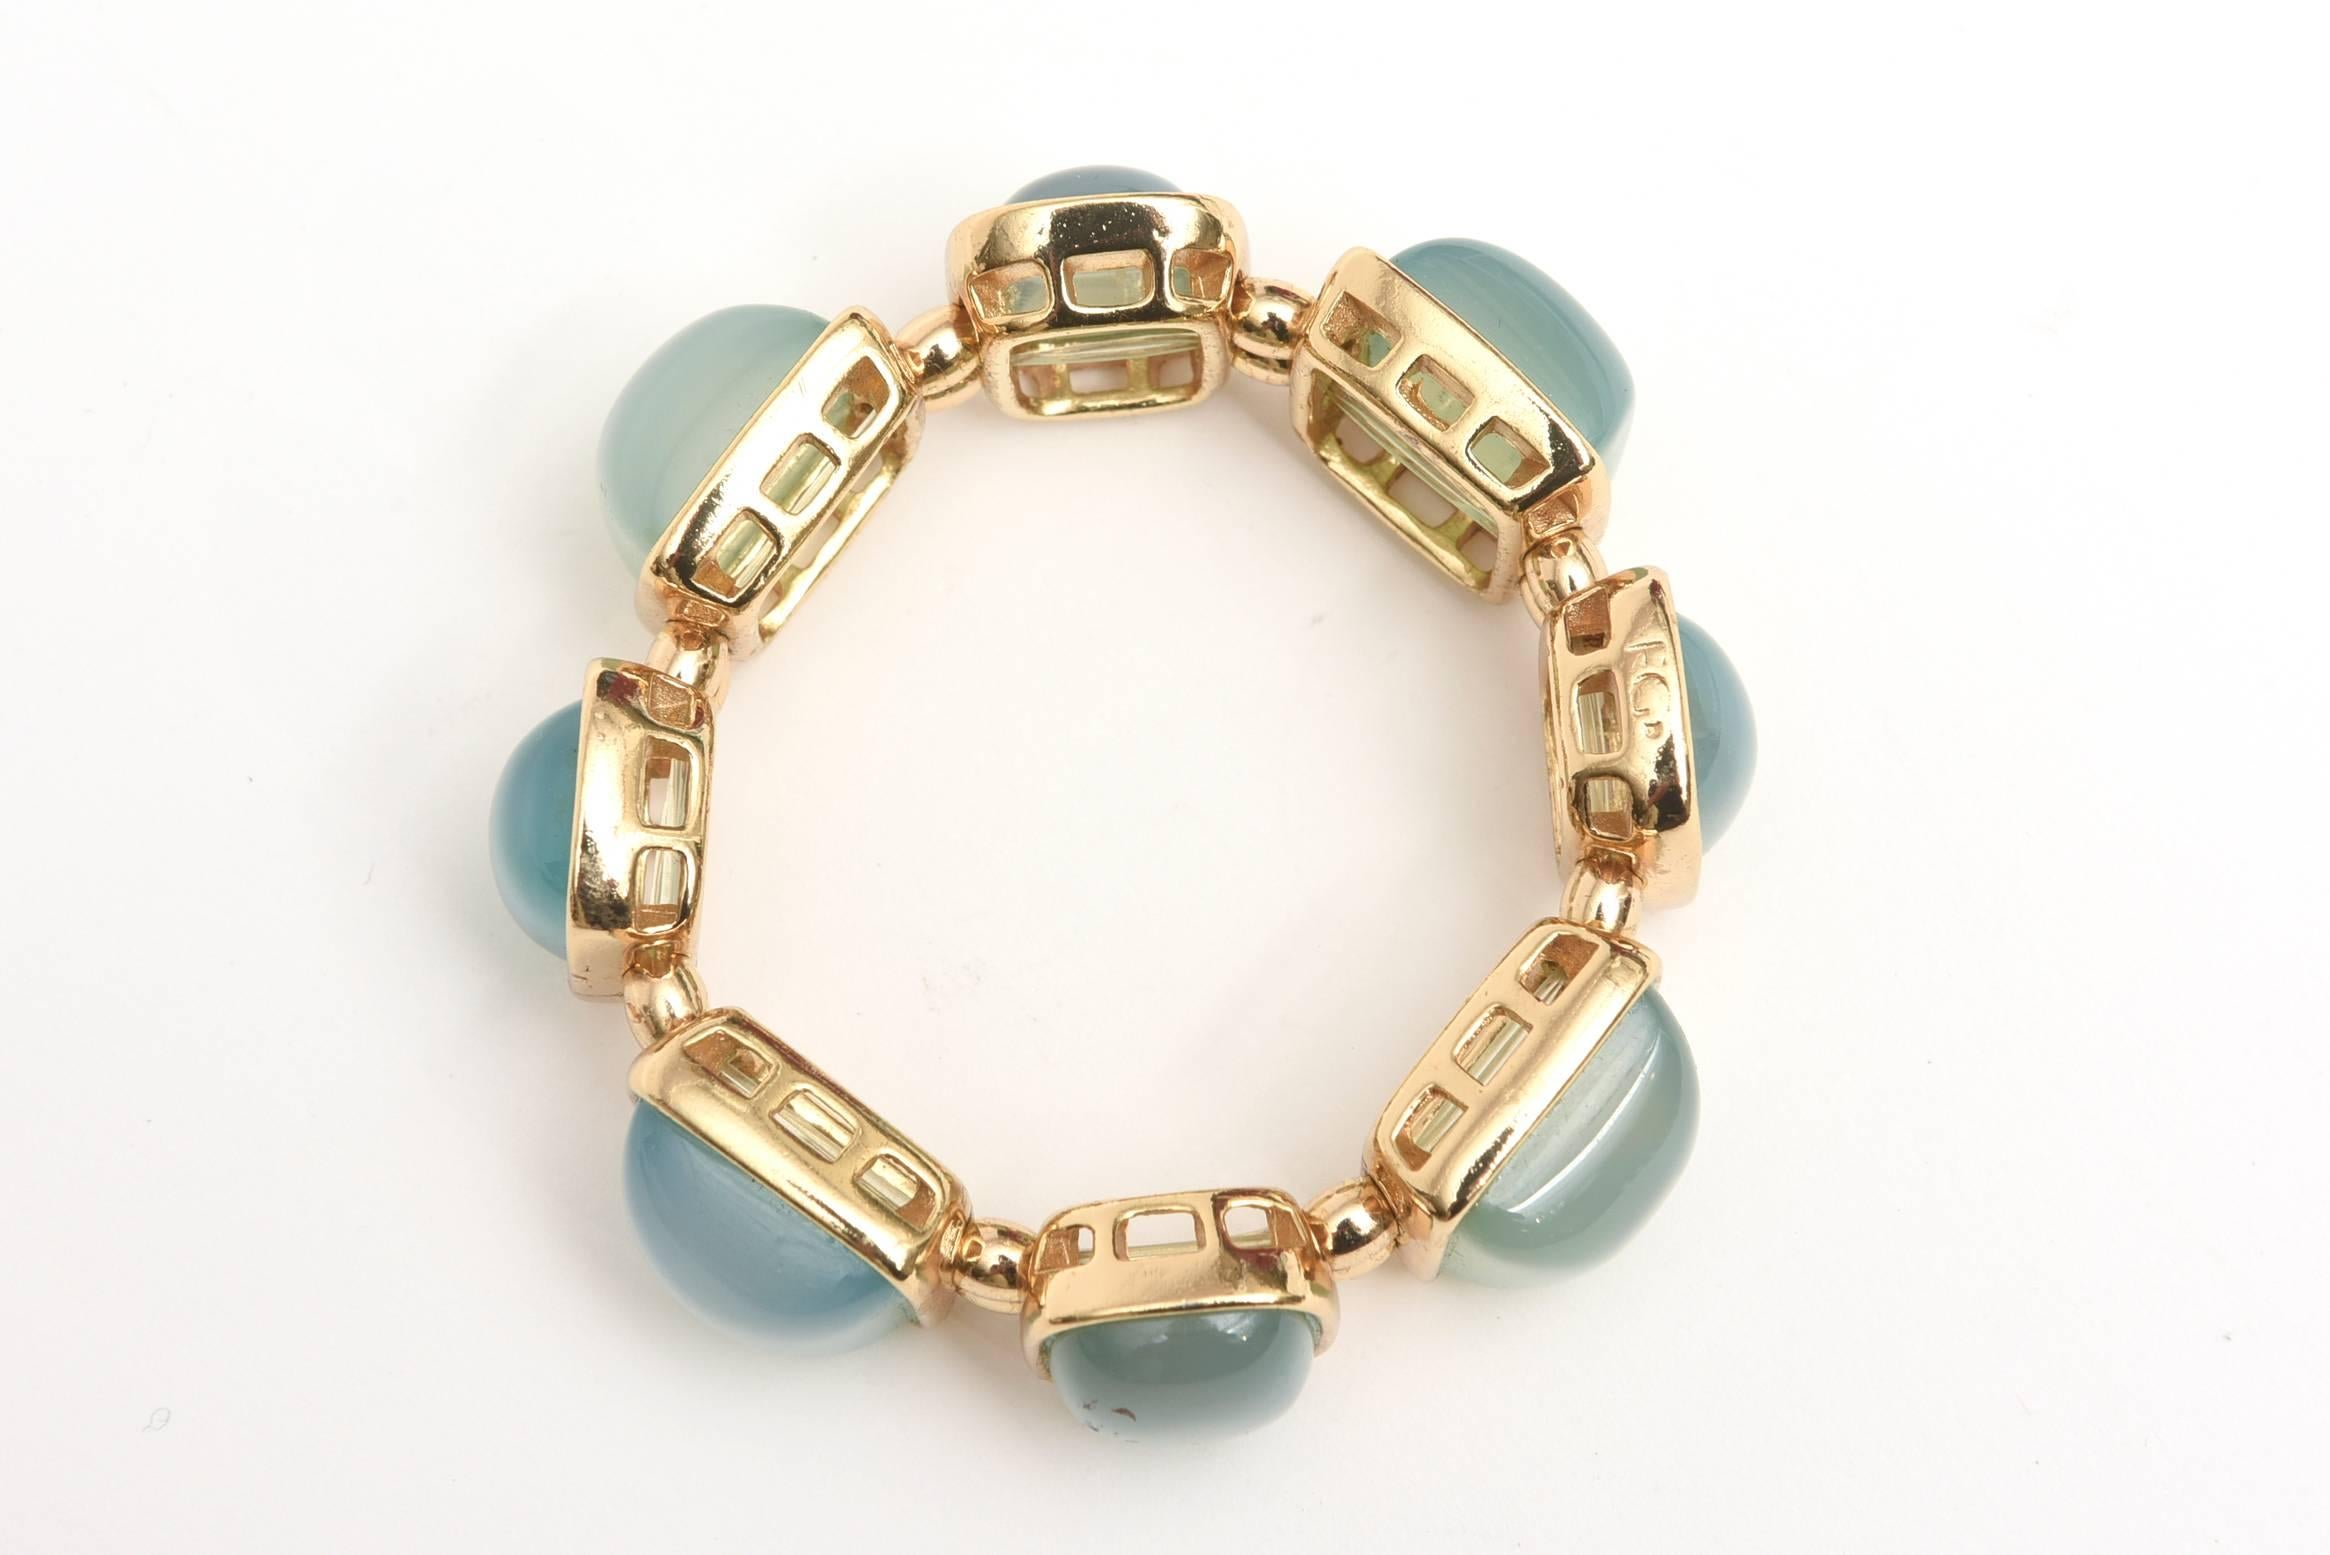 Modern Set of Cabochon Chalcedony 24 Gold Plated Bracelet and Earrings SAT. SALE